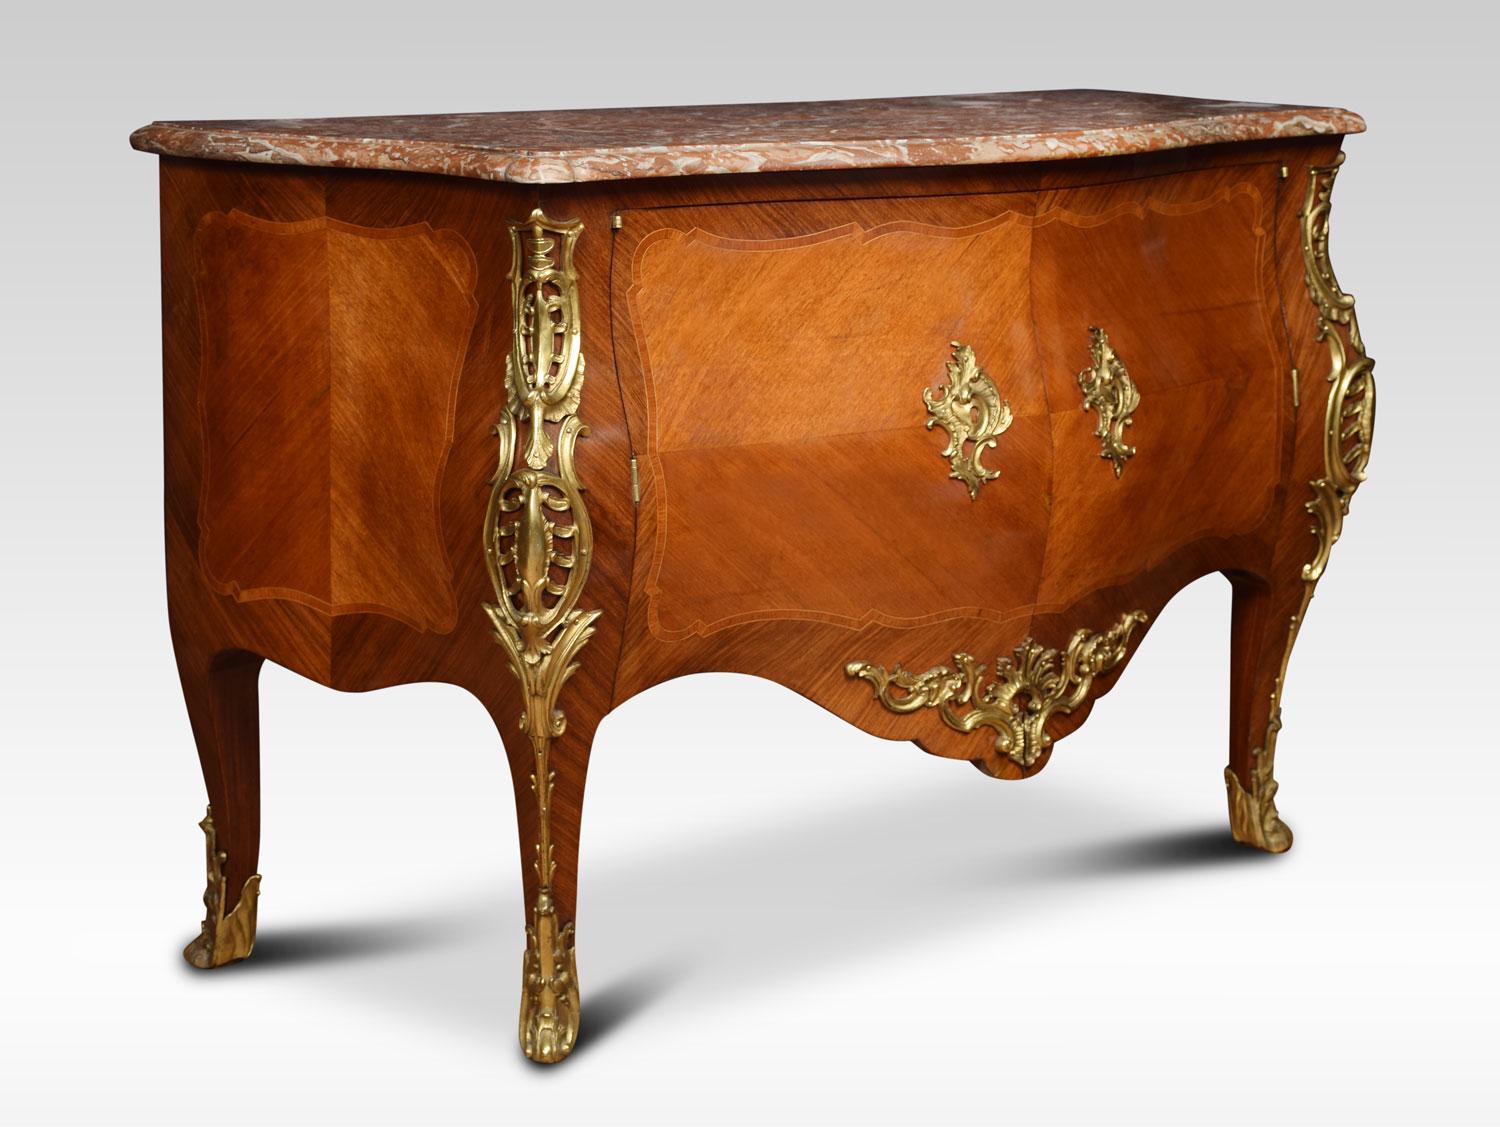 Late 18th century French gilt bronze-mounted walnut bombe shaped commode with a molded Spanish brocatello marble top above a pair of quarter-veneered doors, opening to reveal two short and one long drawers all raised up on cabriole legs terminating